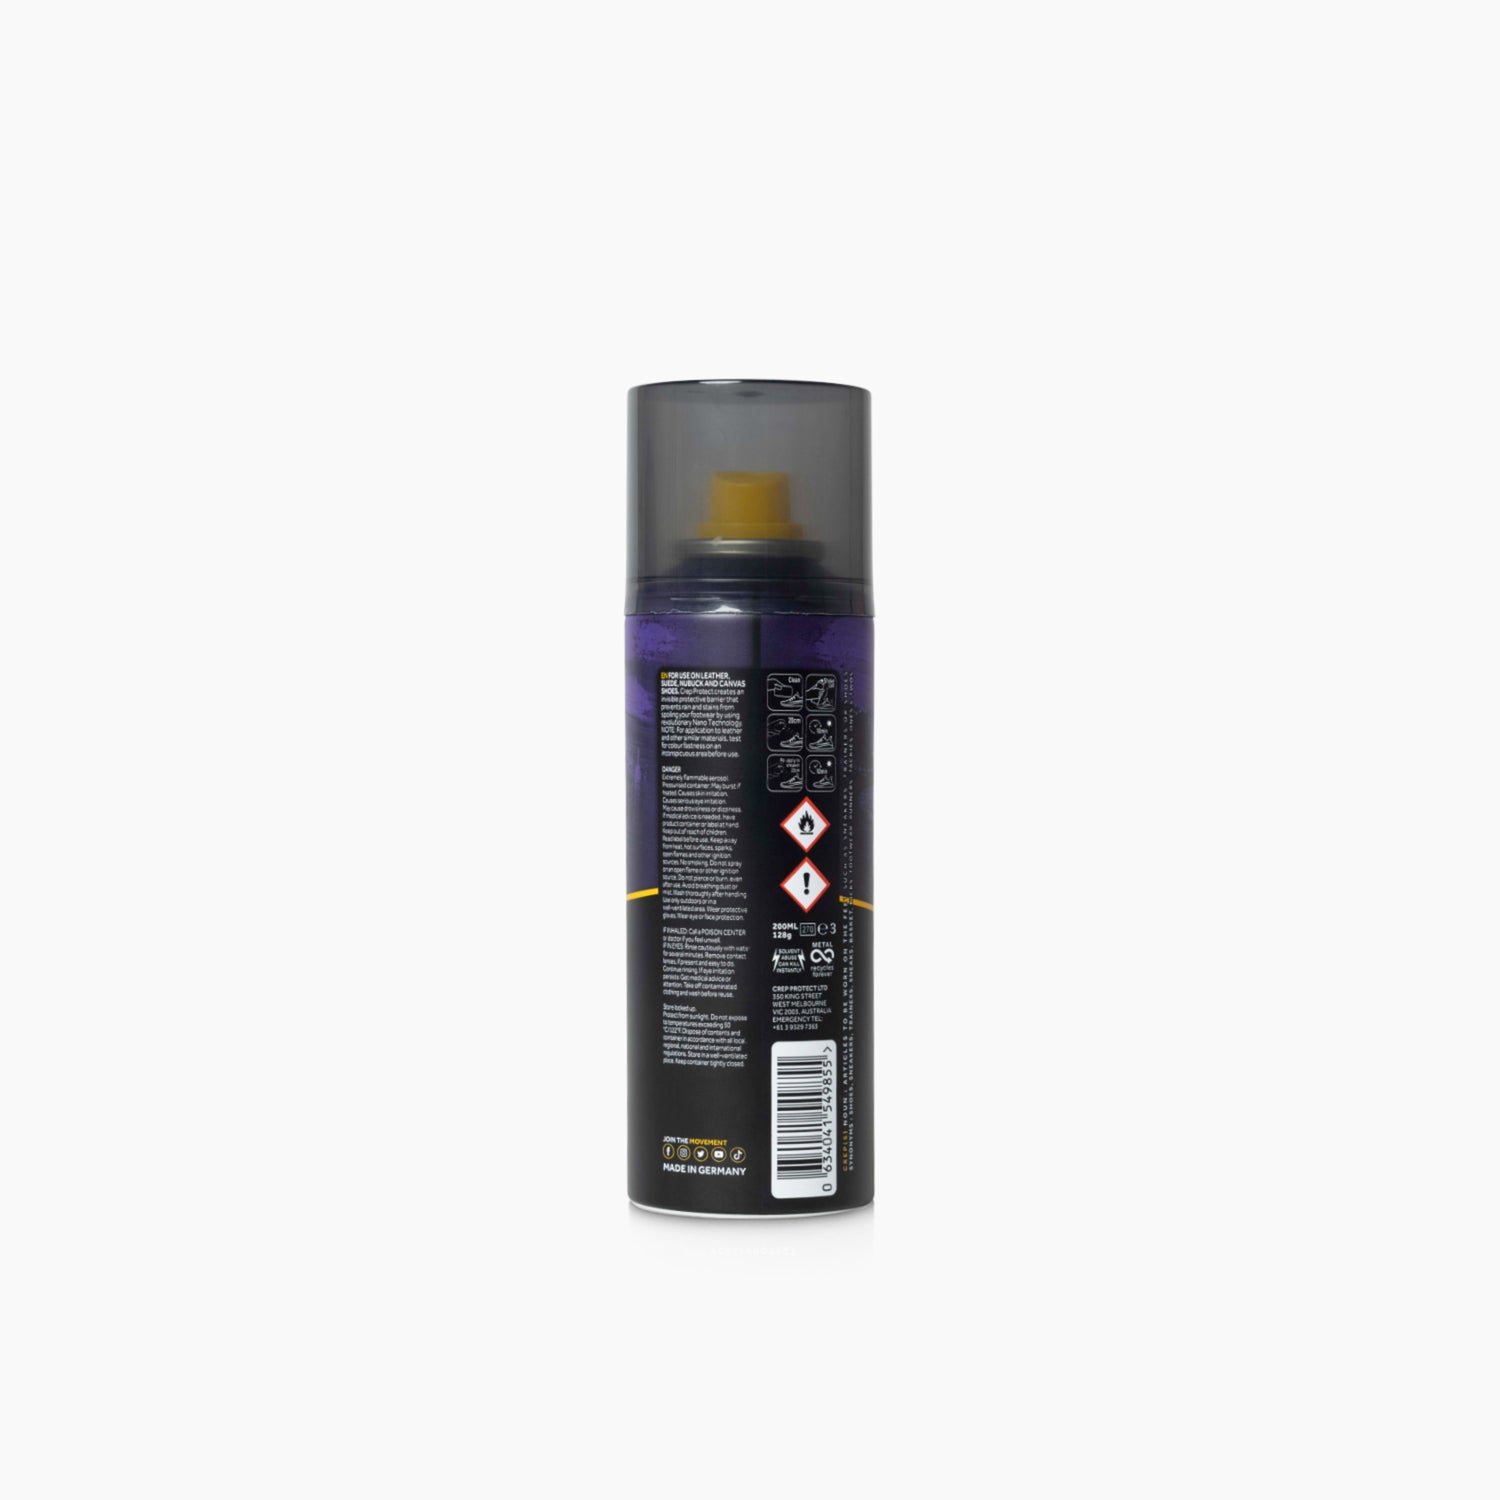 CREP PROTECT SPRAY 5 oz. (200 ml. The Ultimate Rain & Stain Resistant  Barrier) 609613804250